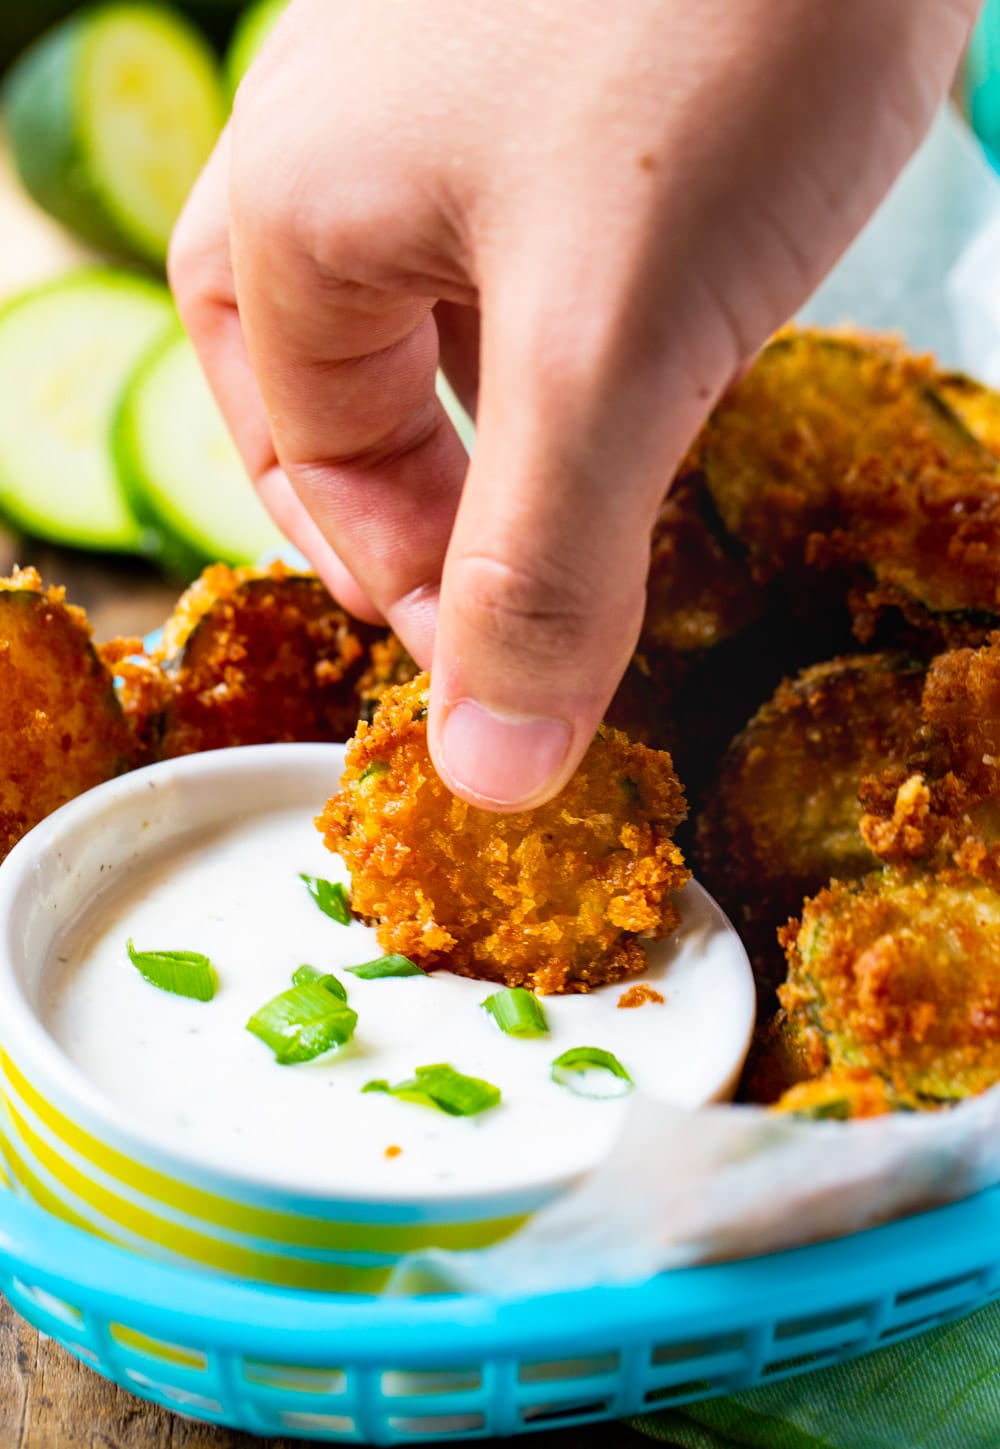 Hand dipping zucchini Chip in dip.